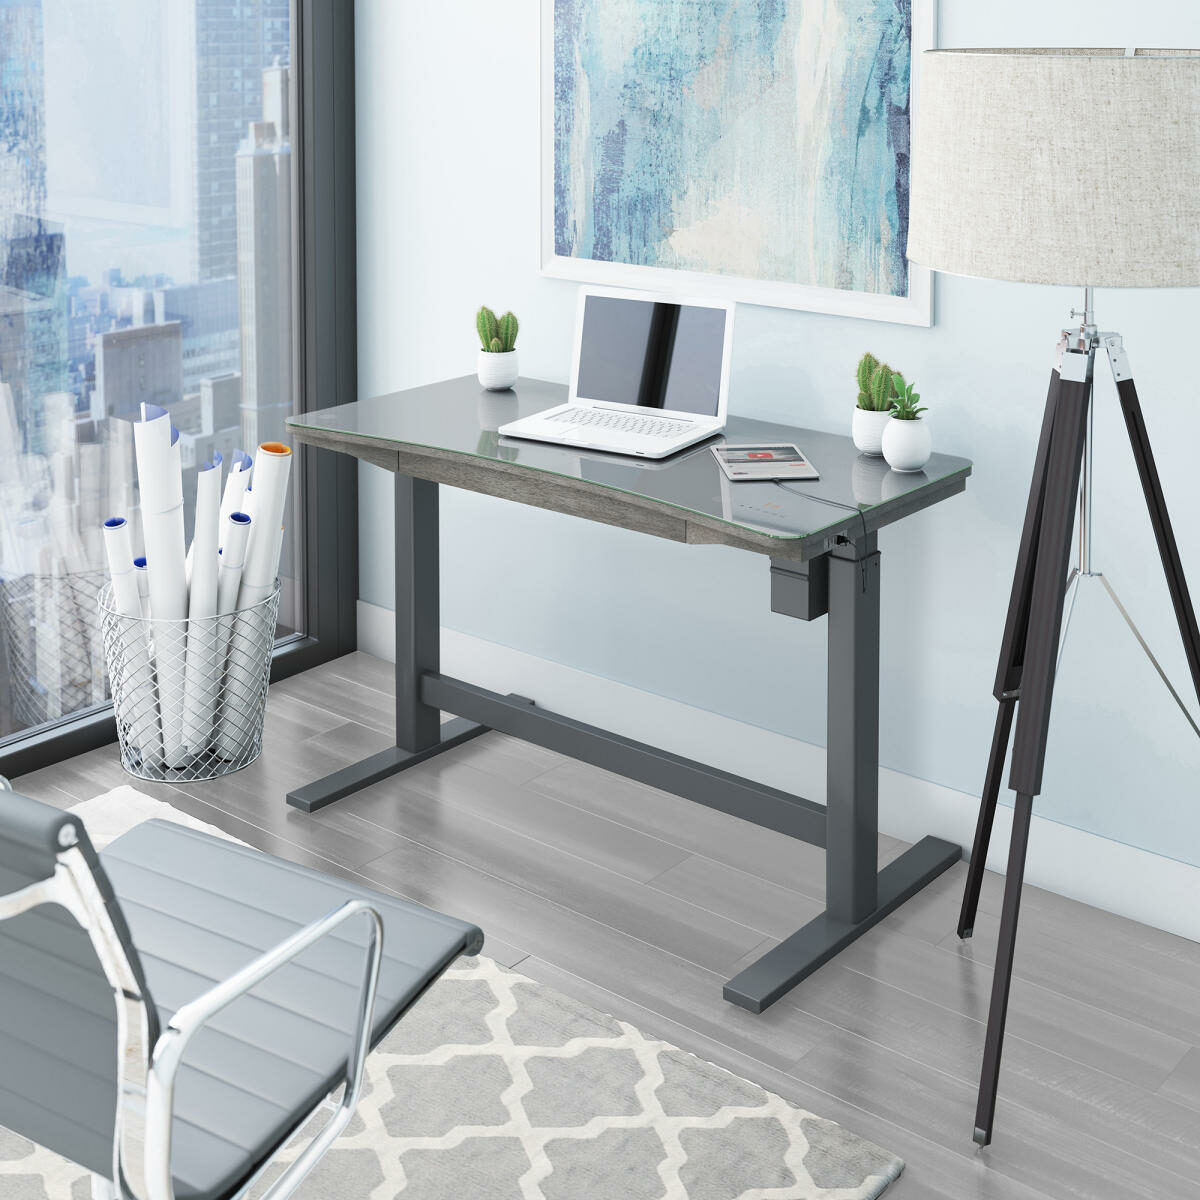 People benefit from electronic standing desks when they need to work from home. A brown standing desk is placed next to a white wall with serene art and a white lamp.